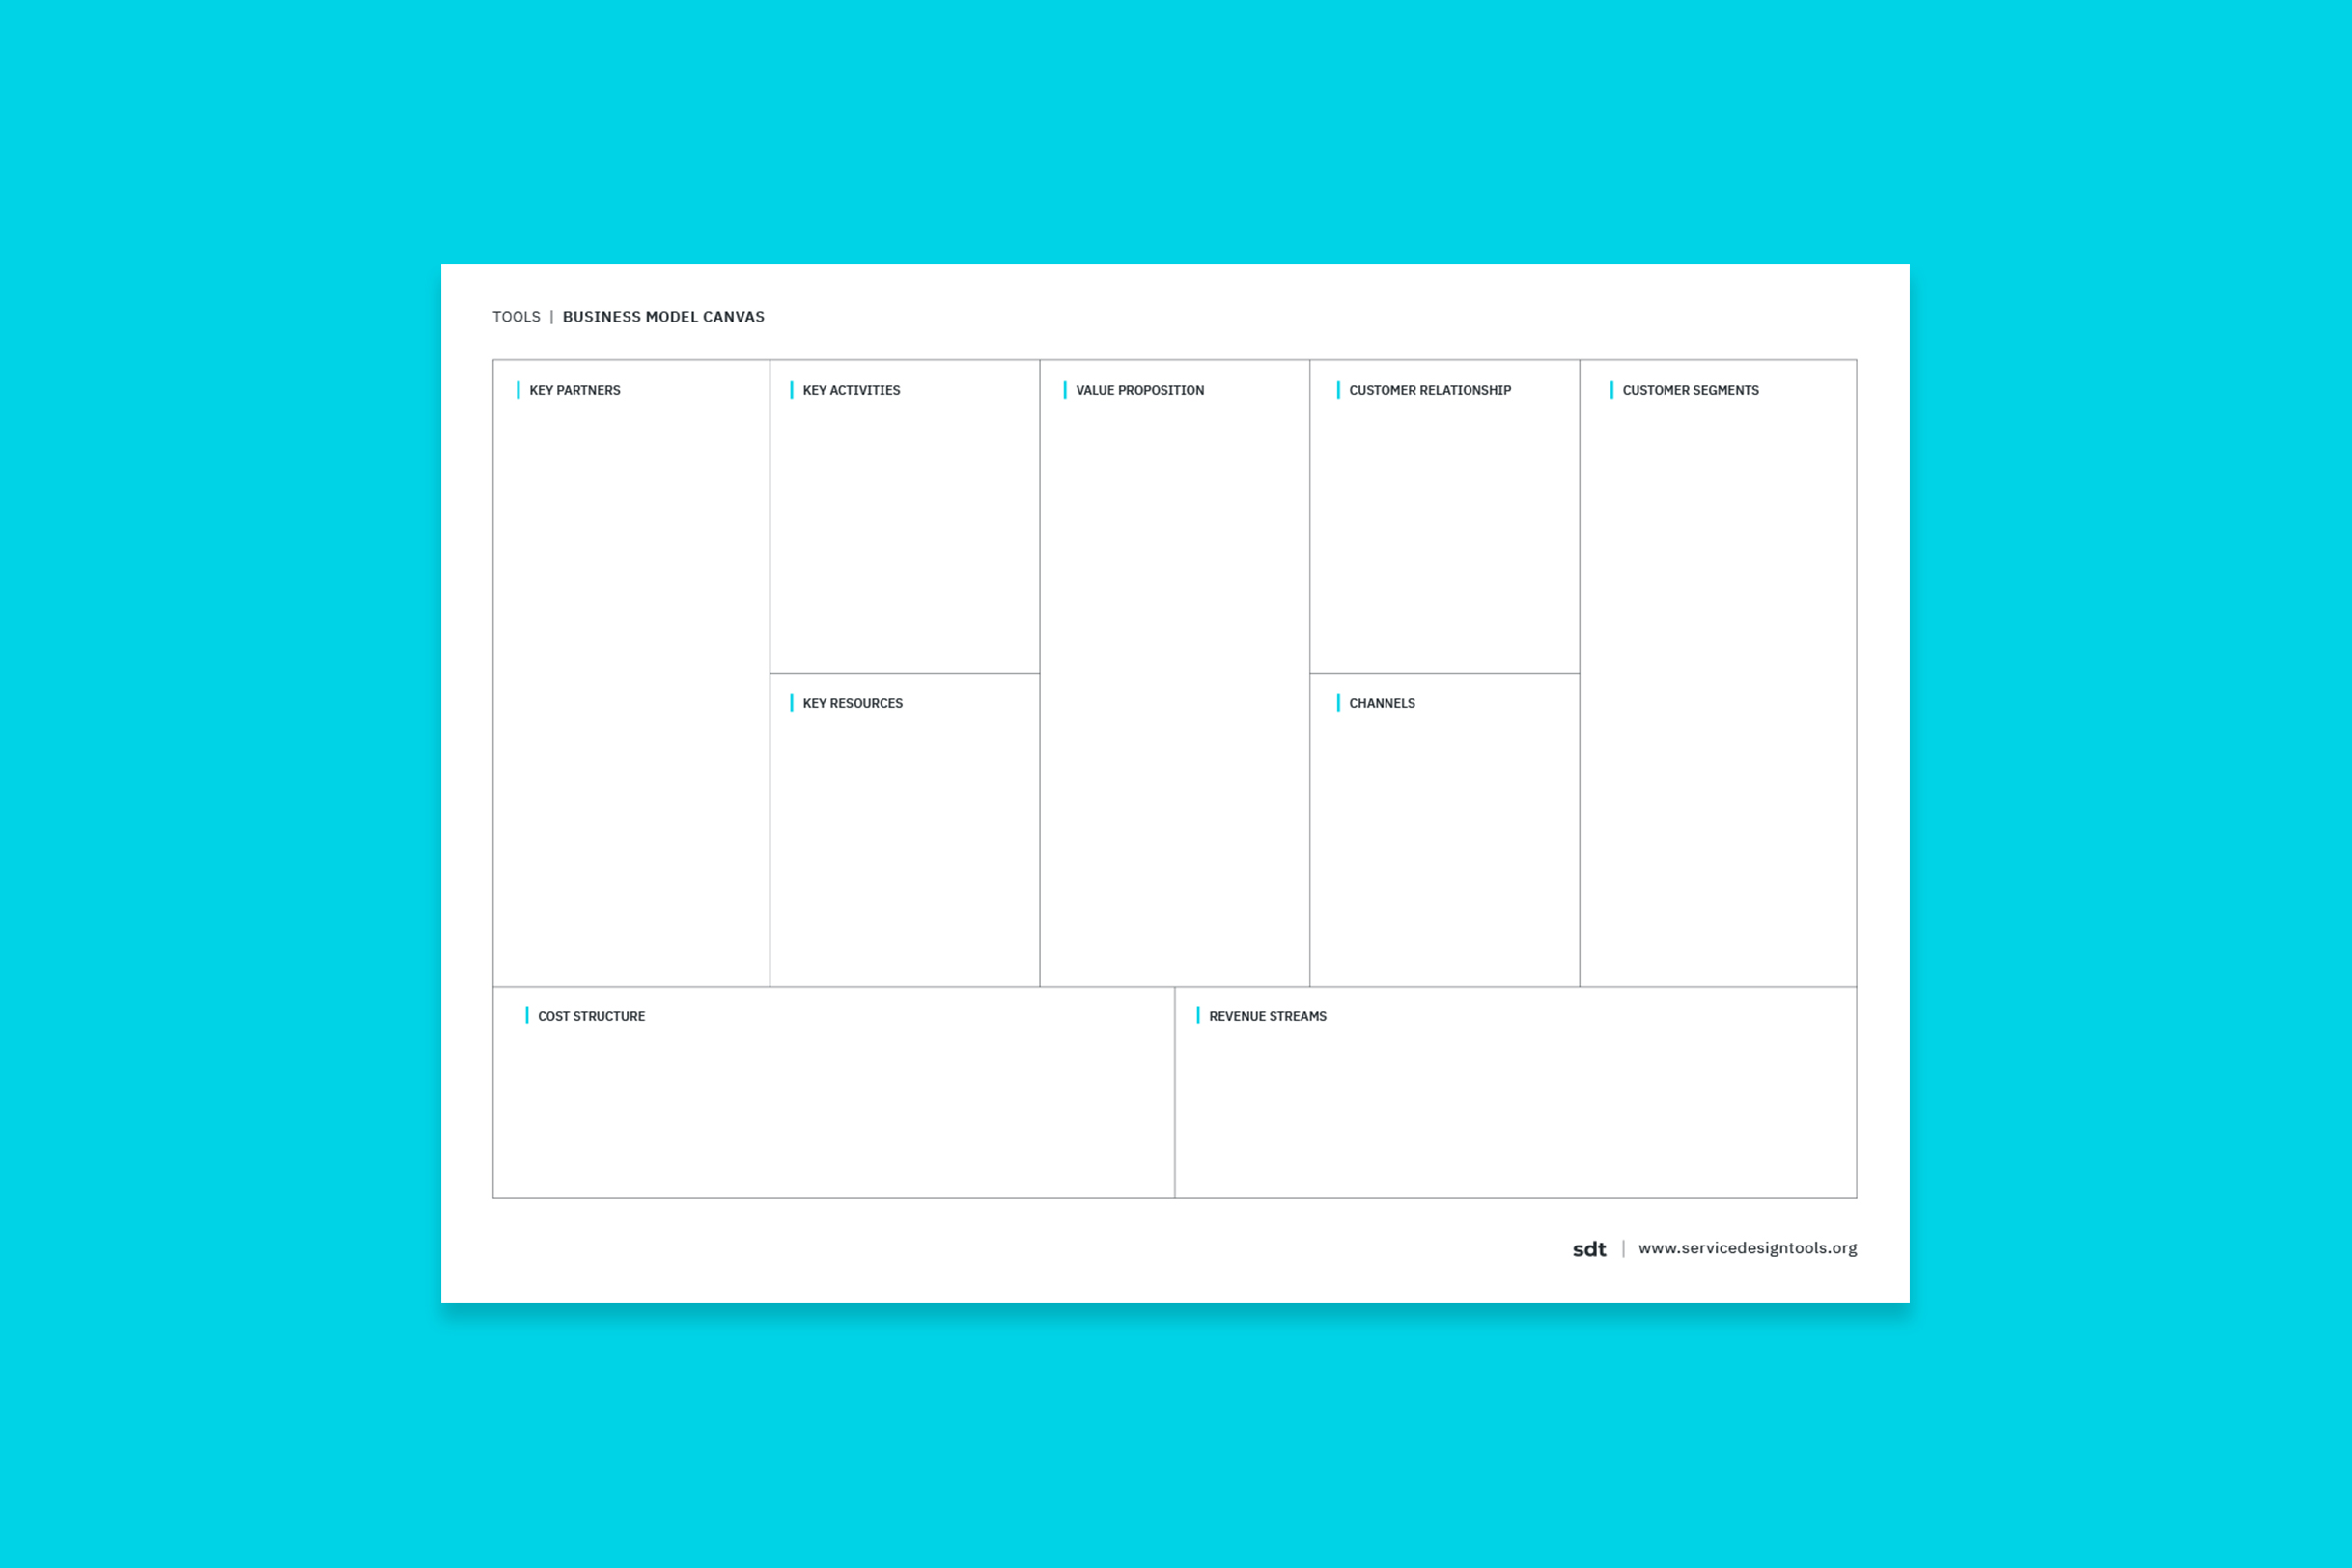 Preview image of the template for Business Model Canvas